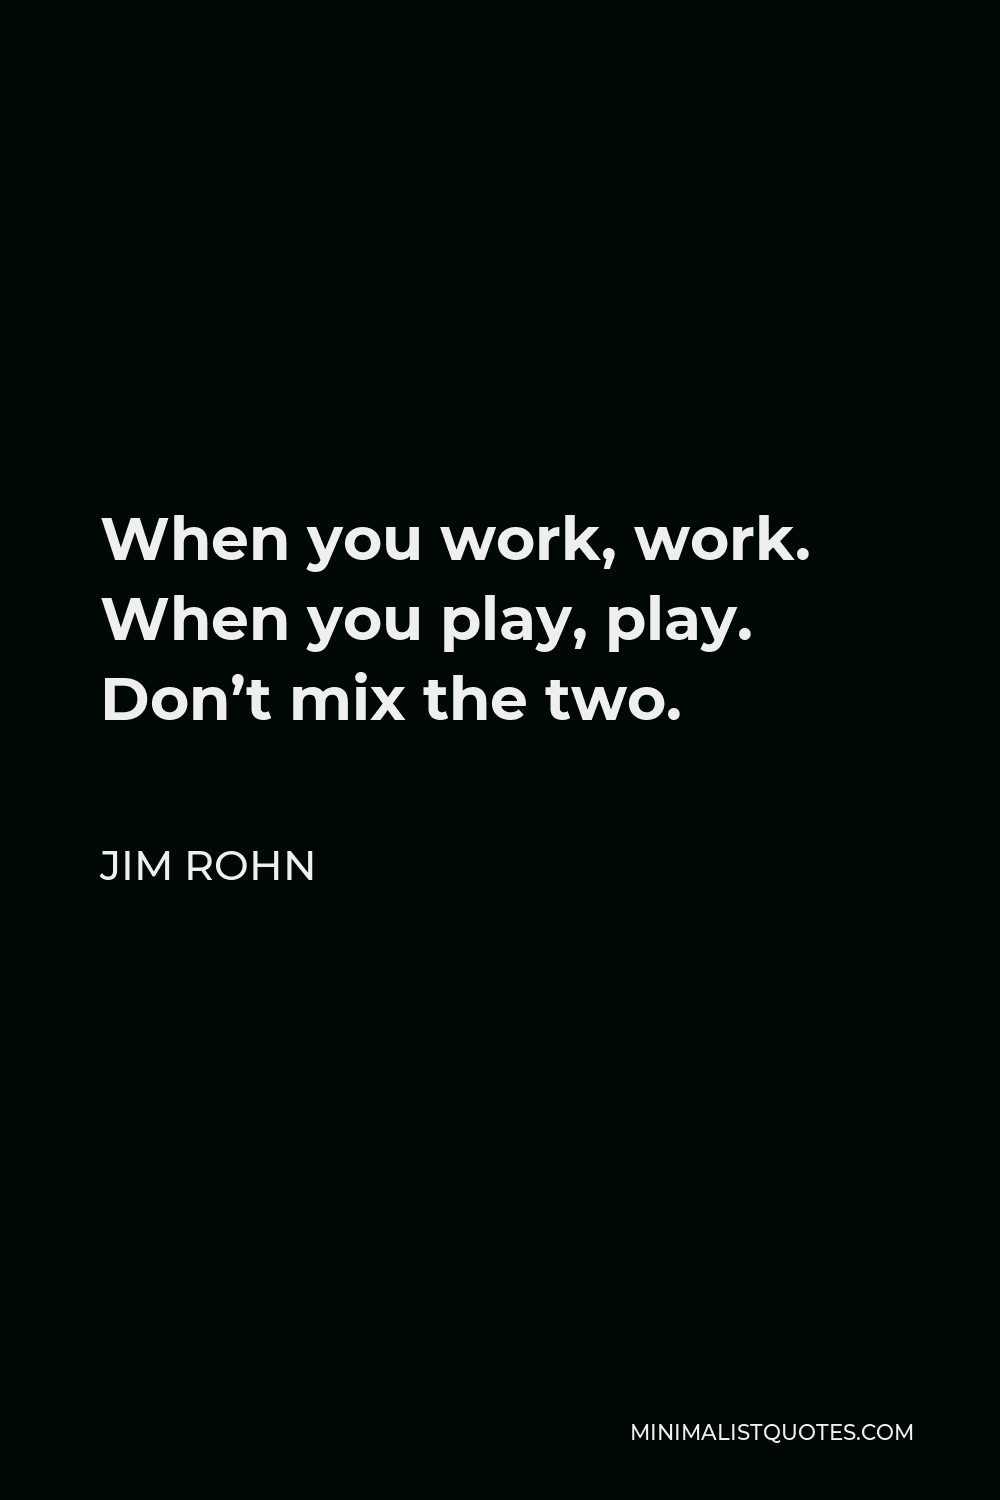 Jim Rohn Quote - When you work, work. When you play, play. Don’t mix the two.